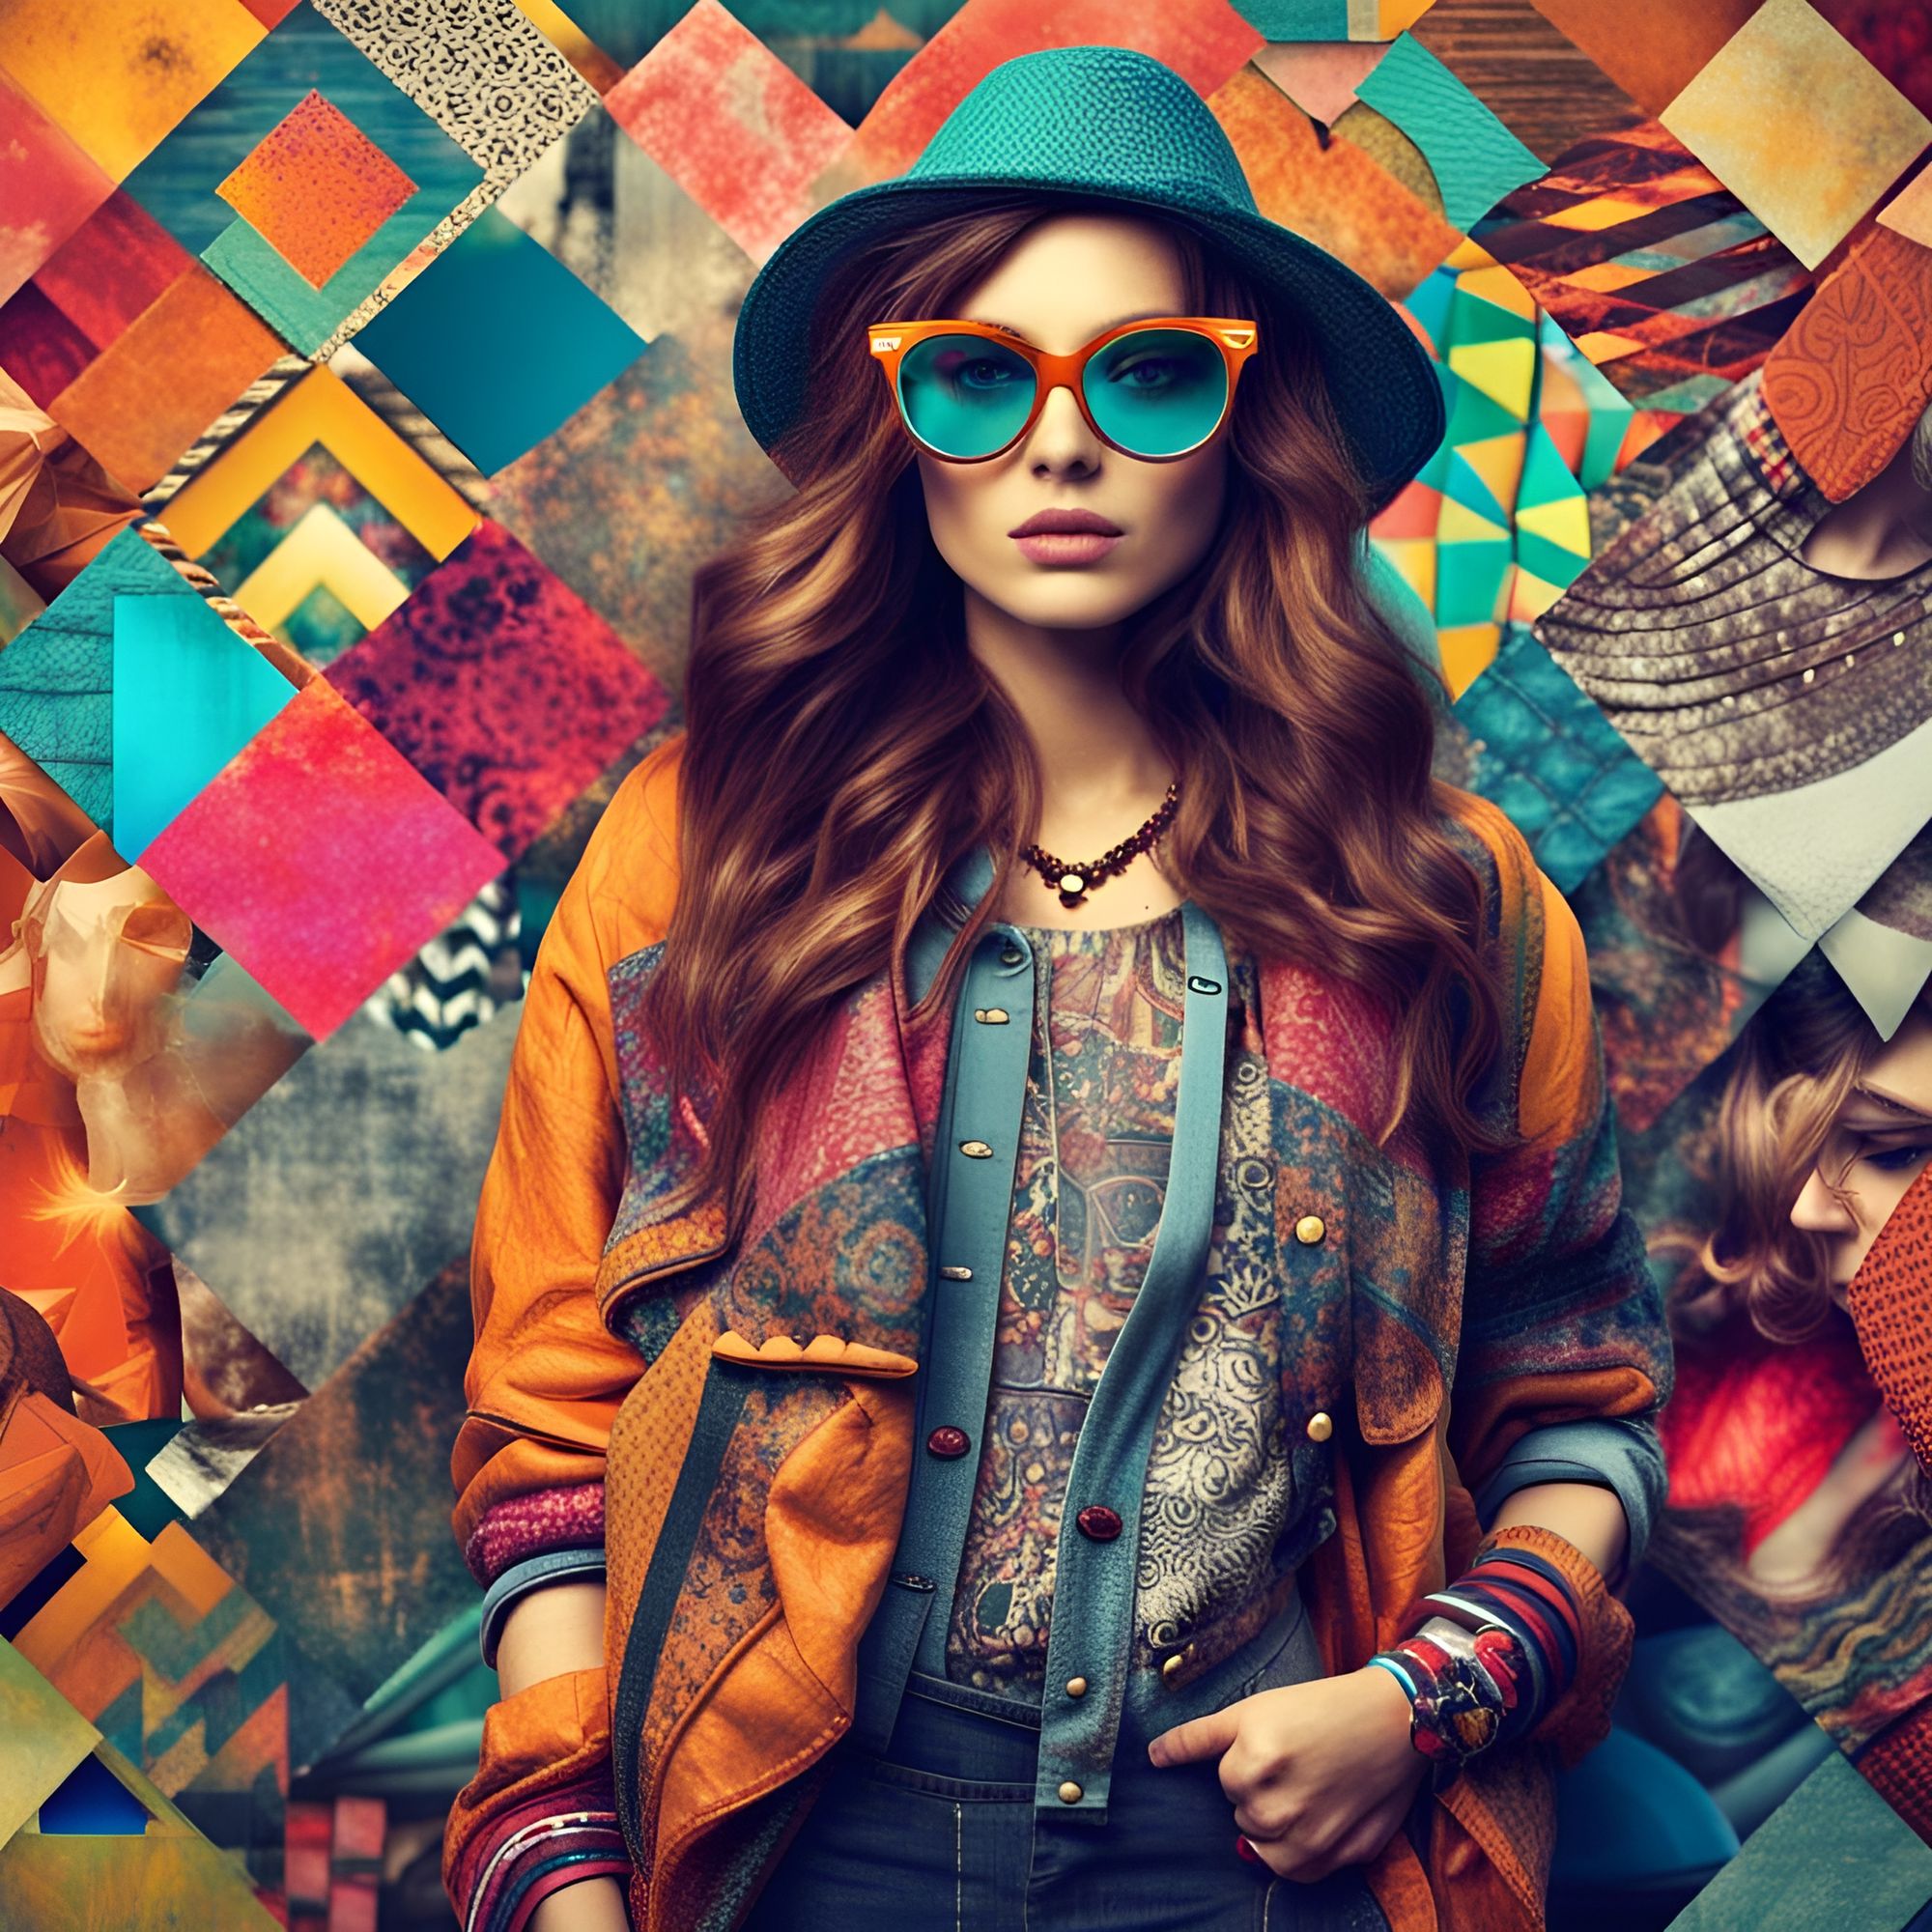 Hipster style: A bold and adventurous stunning fashion female : r/nightcafe